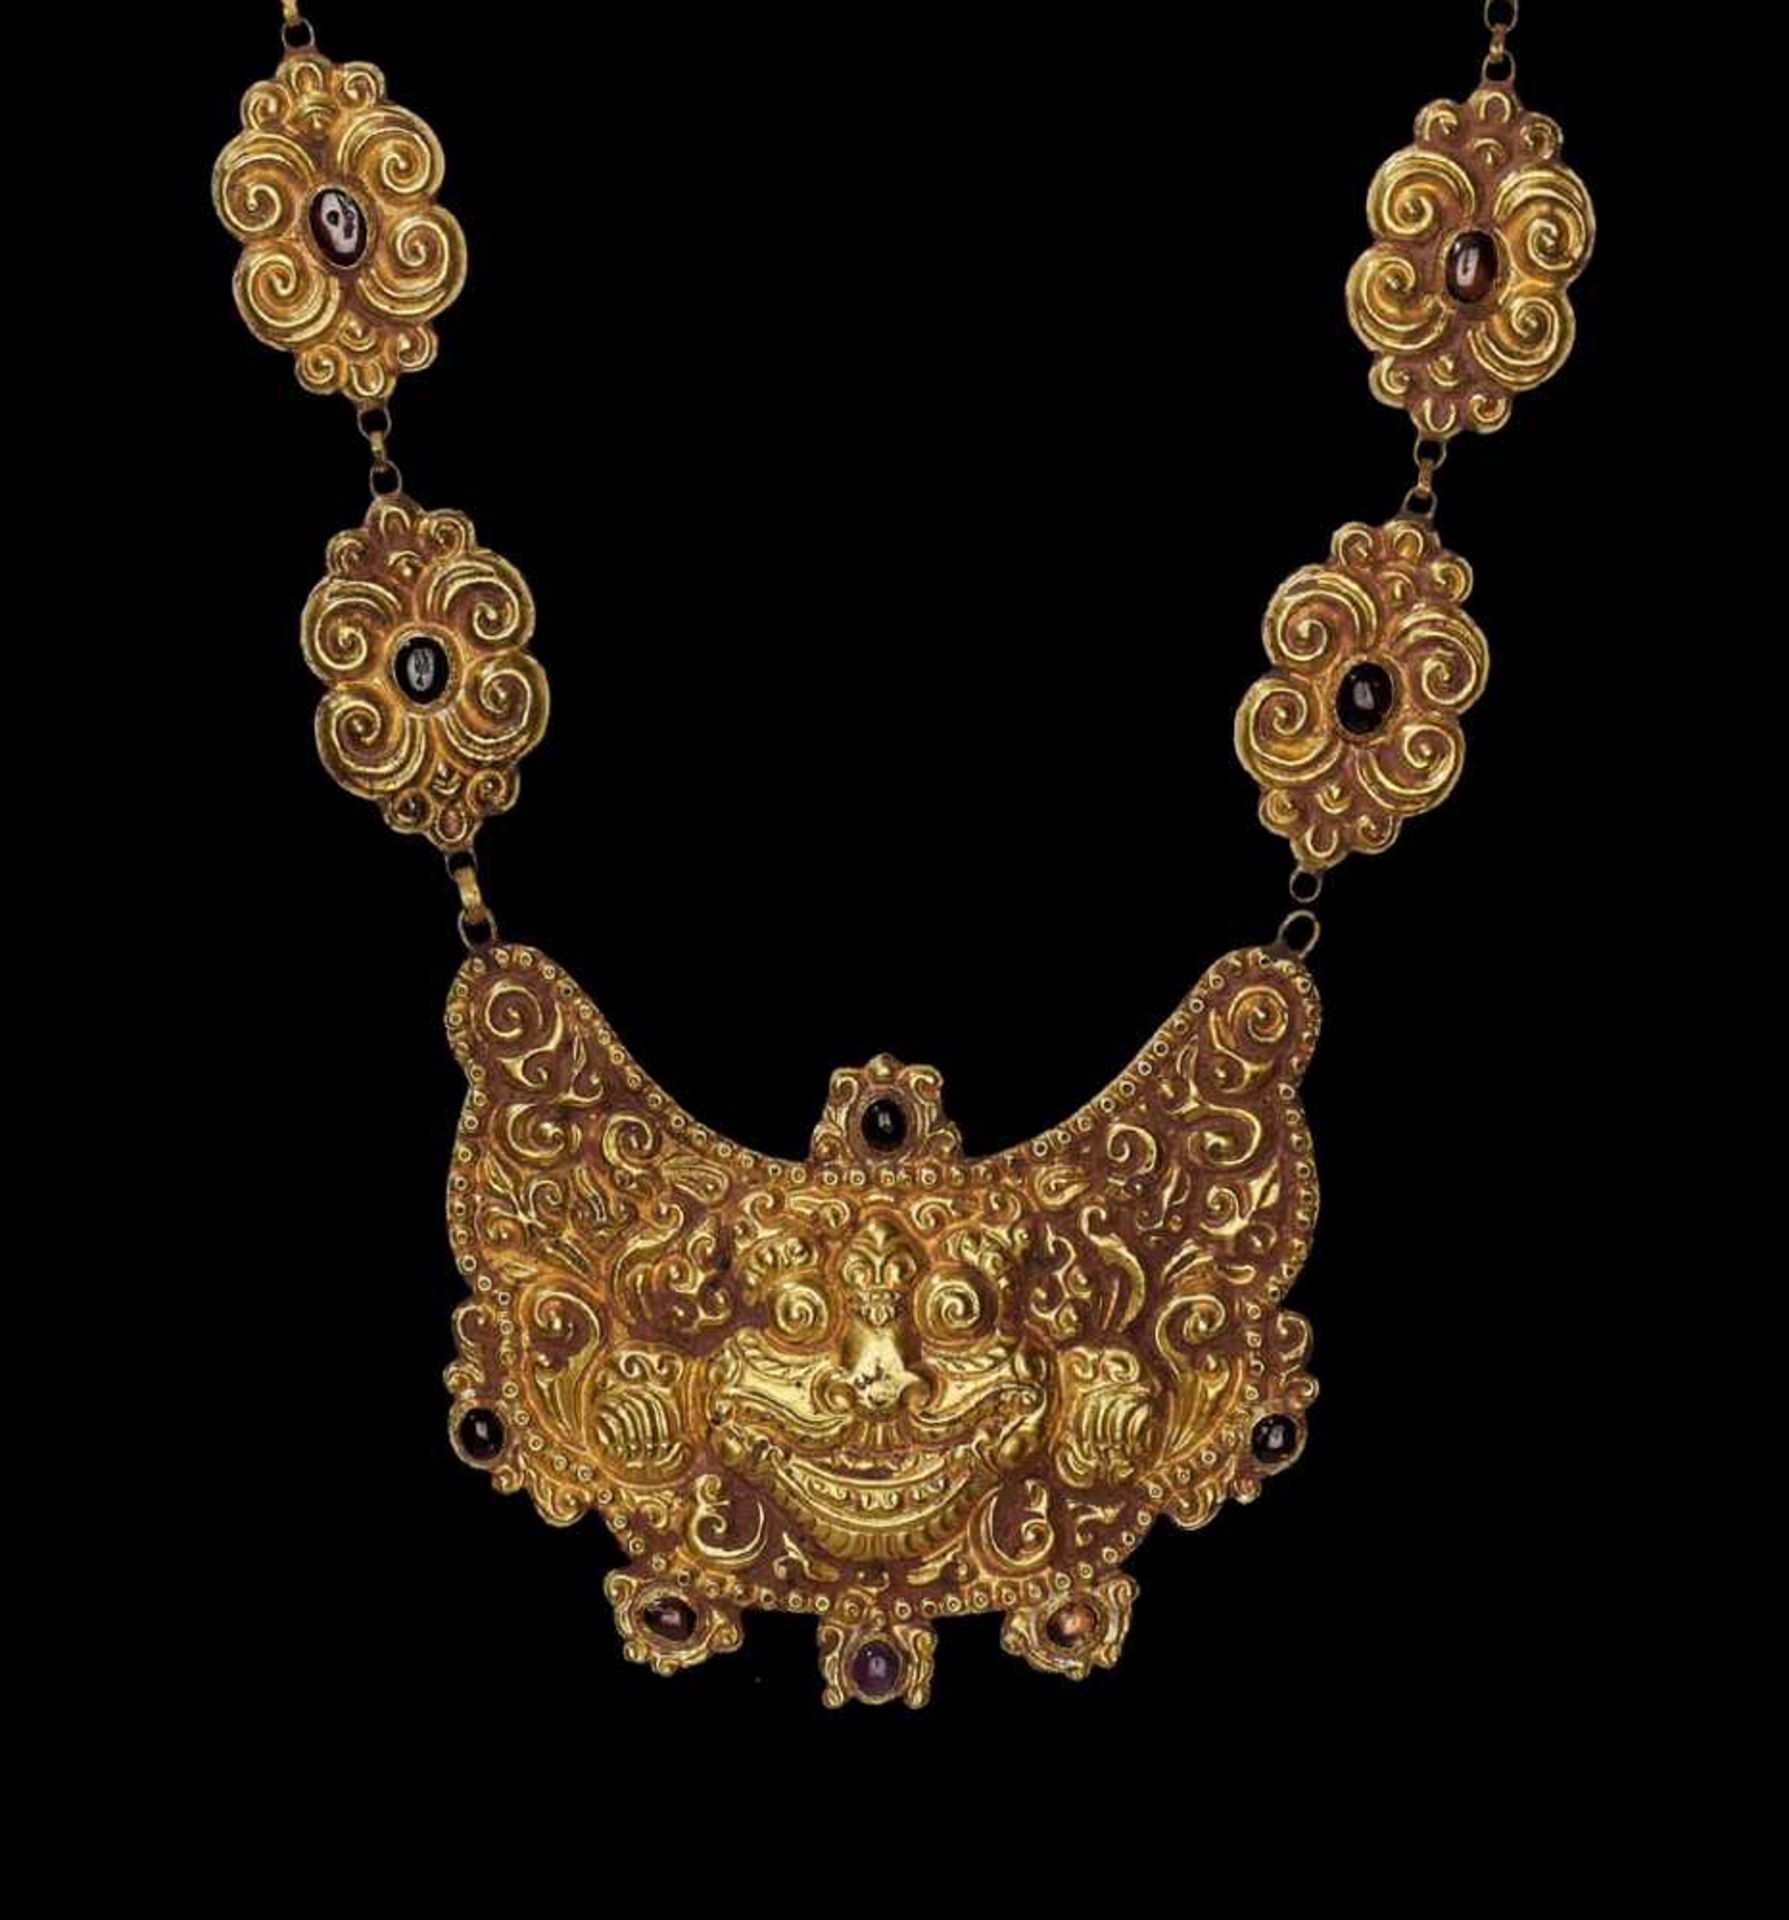 A CHAM REPOUSSÉ GOLD NECKLACE WITH A PECTORAL DEPICTING KALA Central Cham kingdom, most probably - Image 2 of 5